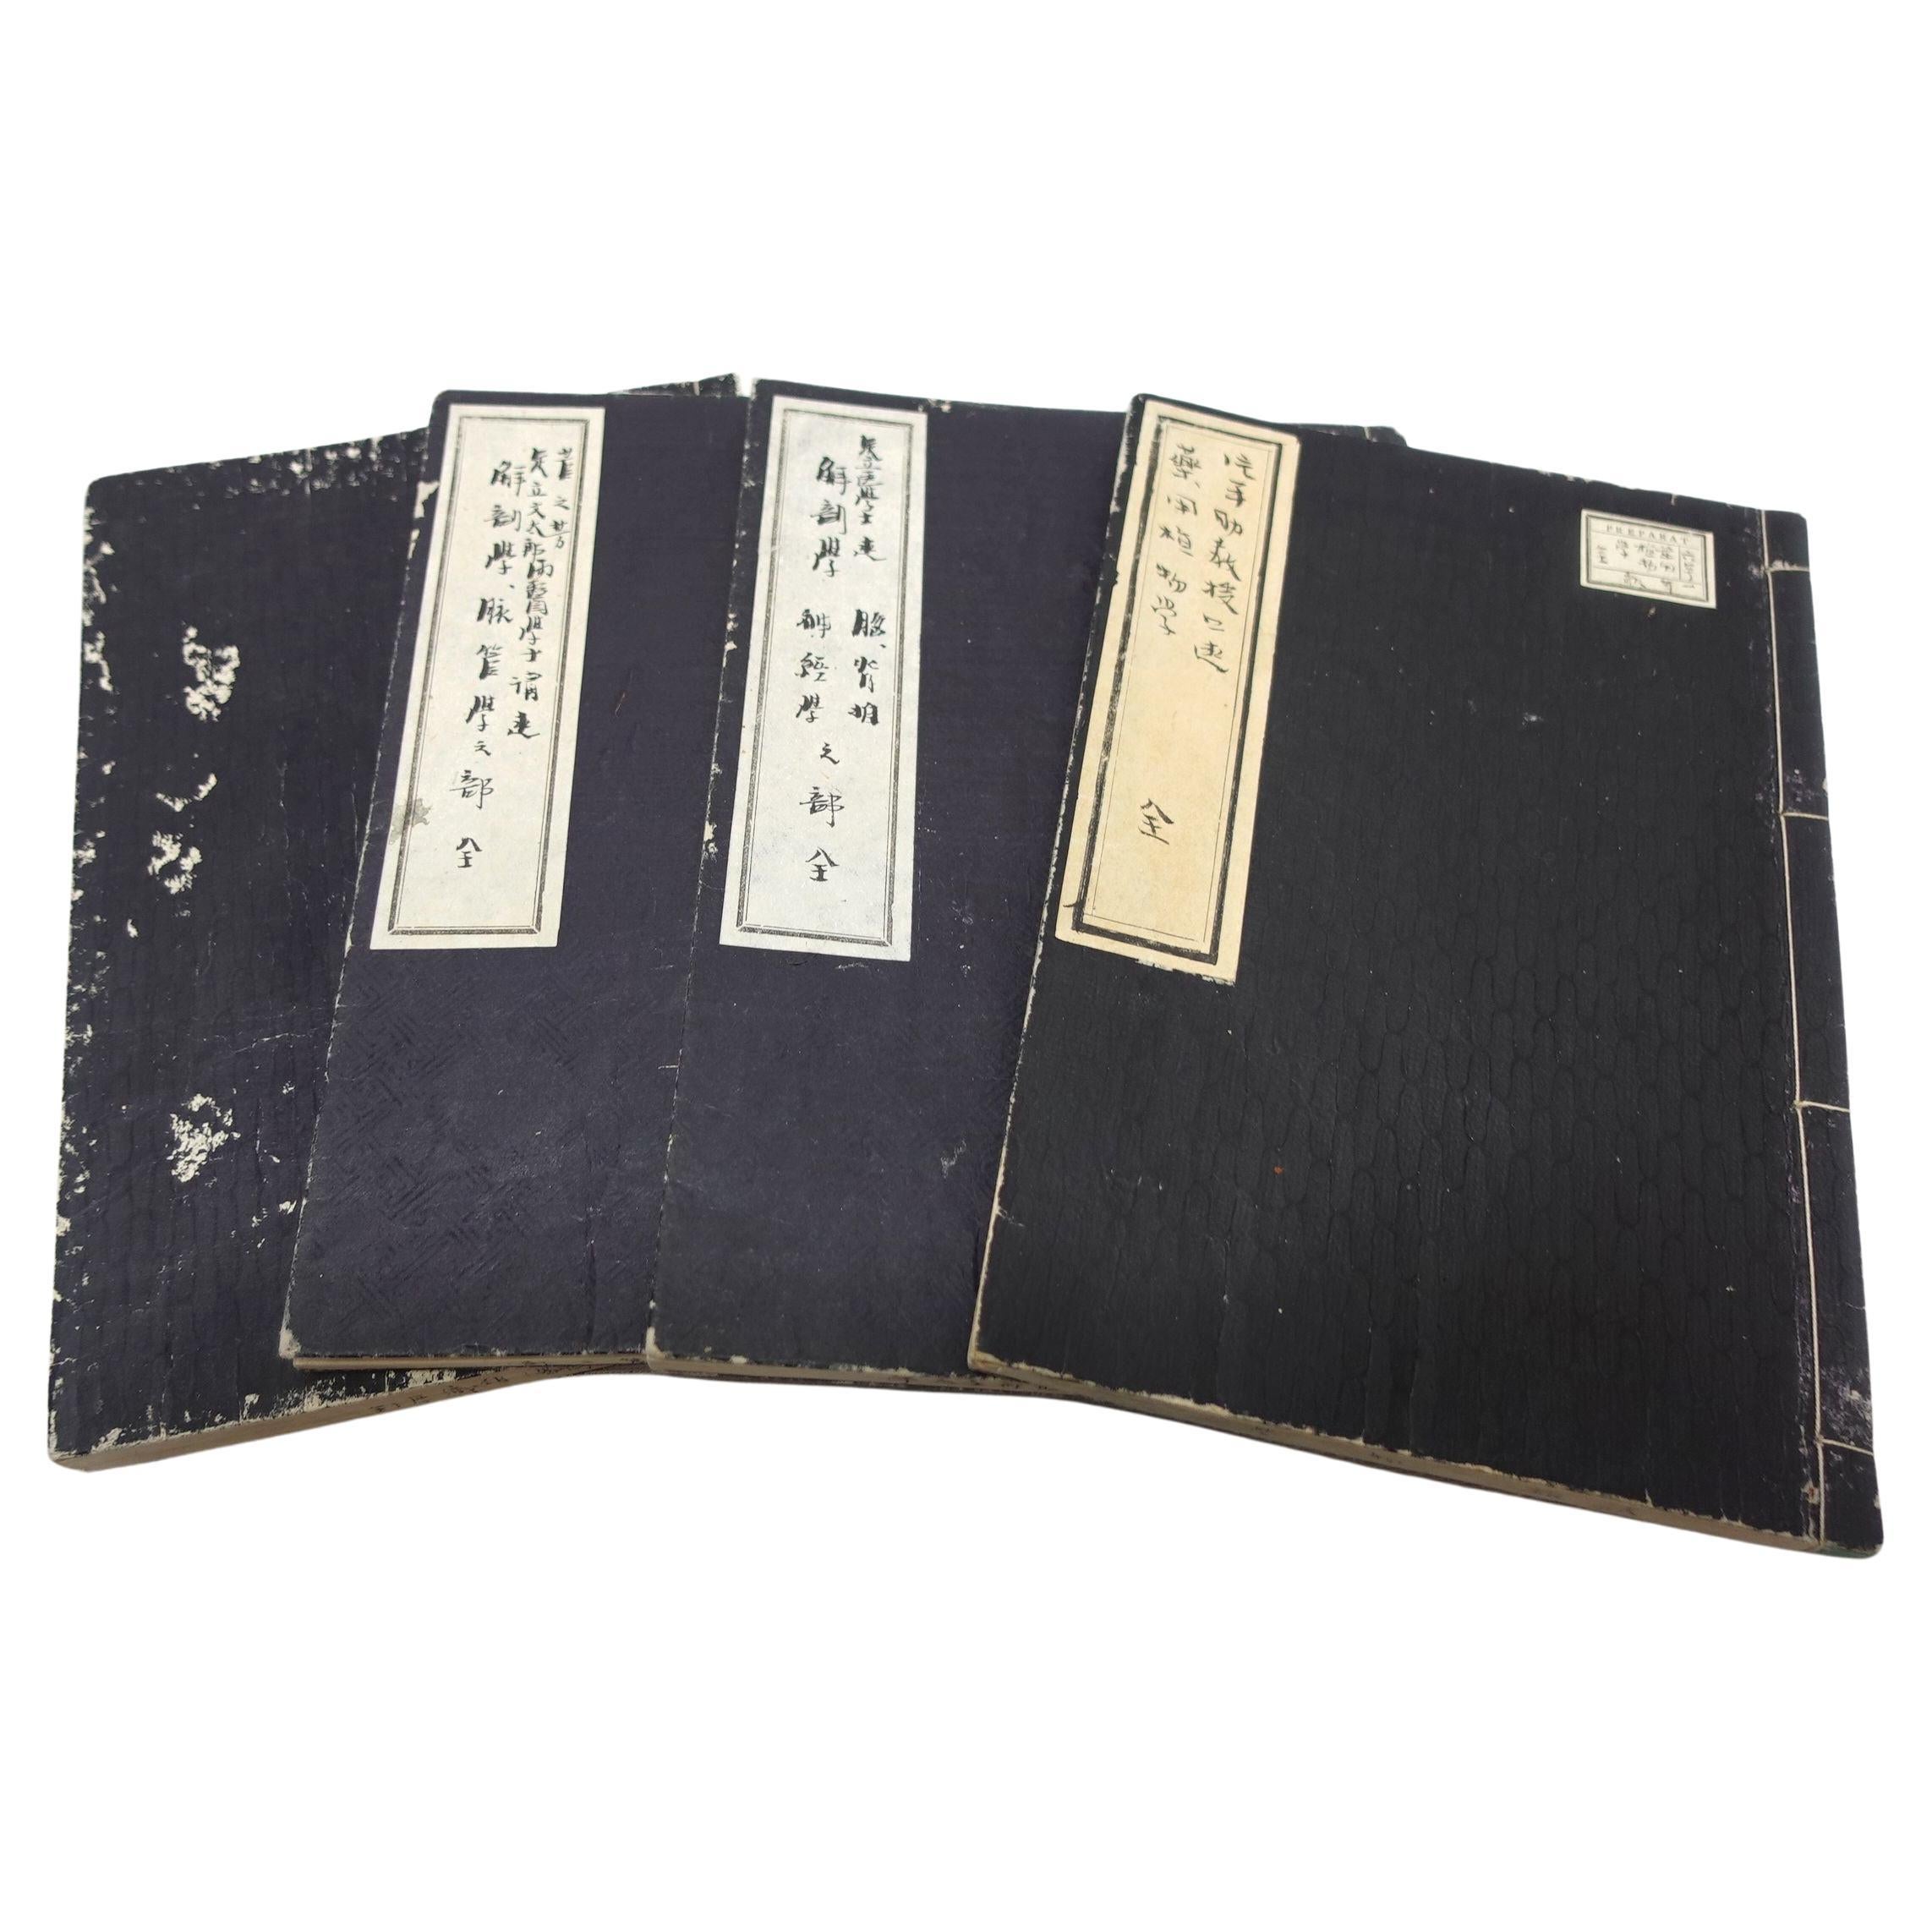 Description
[MEDICINE -- MANUSCRIPT]. Collection of lecture notebooks from courses taken in anatomy, materia medica, and other medical subjects at the Kyoto Imperial University. [Kyoto, 1900].

4 volumes, 8vo (230 x 147mm). In Japanese. Written in